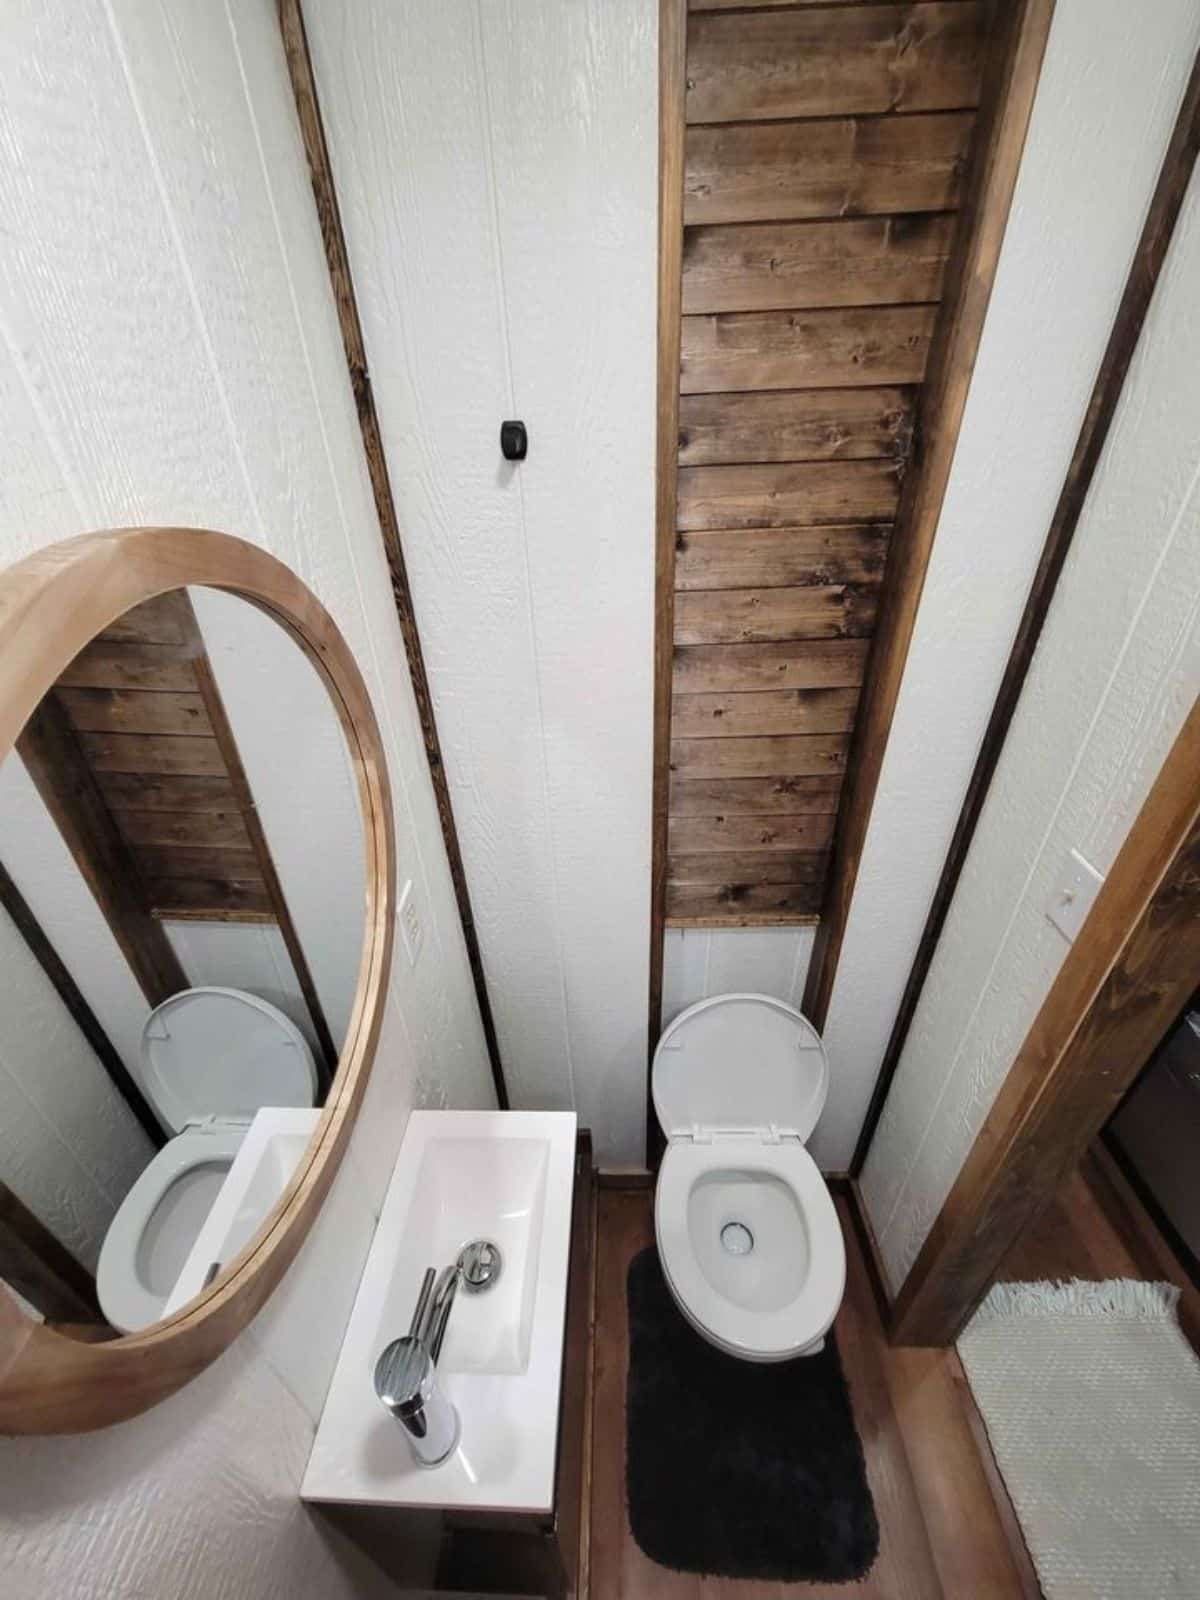 standard fitting in bathroom of 25' tiny house on wheels